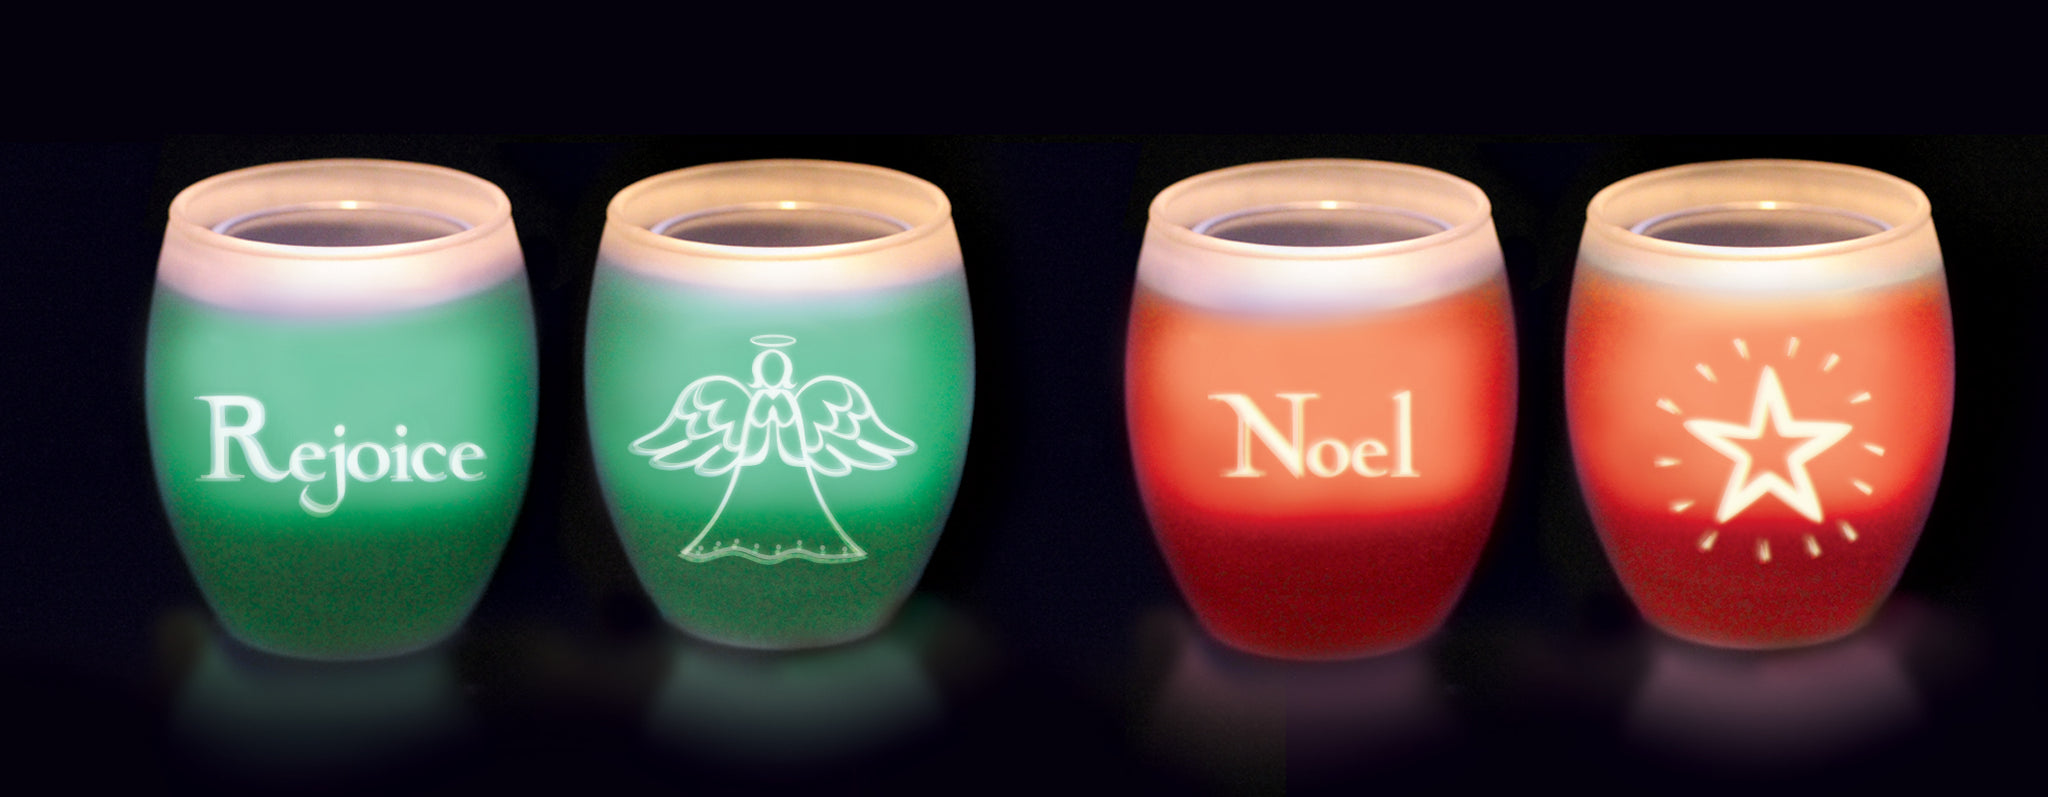 Christmas Messages Of Light Candle Holder  (Noel)Christmas Messages Of Light Candle Holder  (Noel)